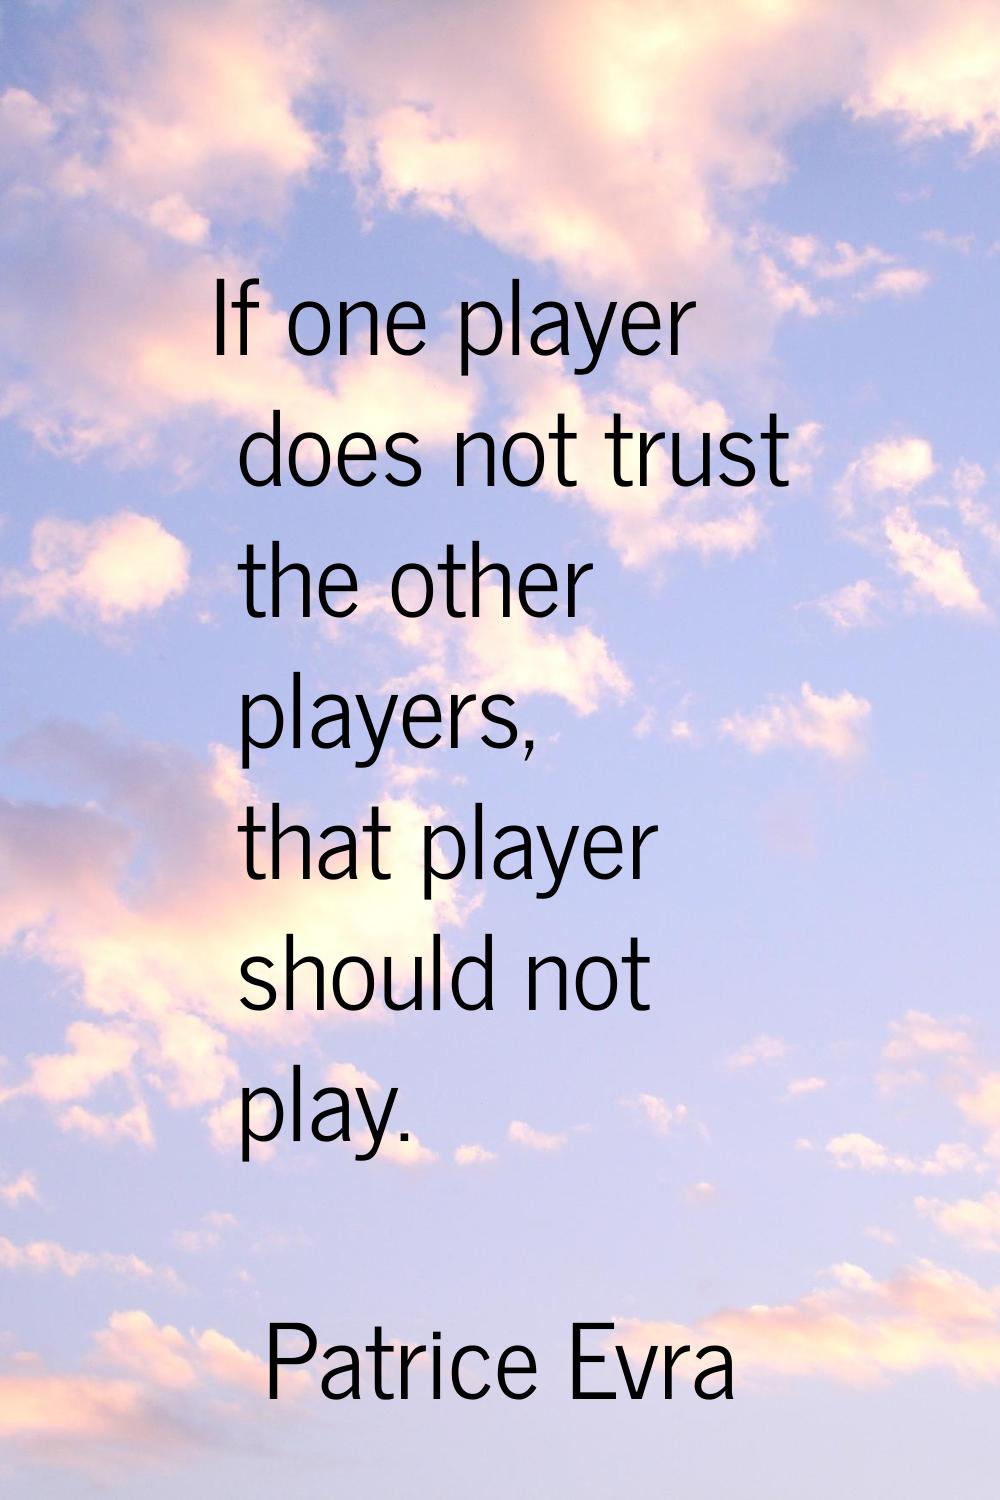 If one player does not trust the other players, that player should not play.